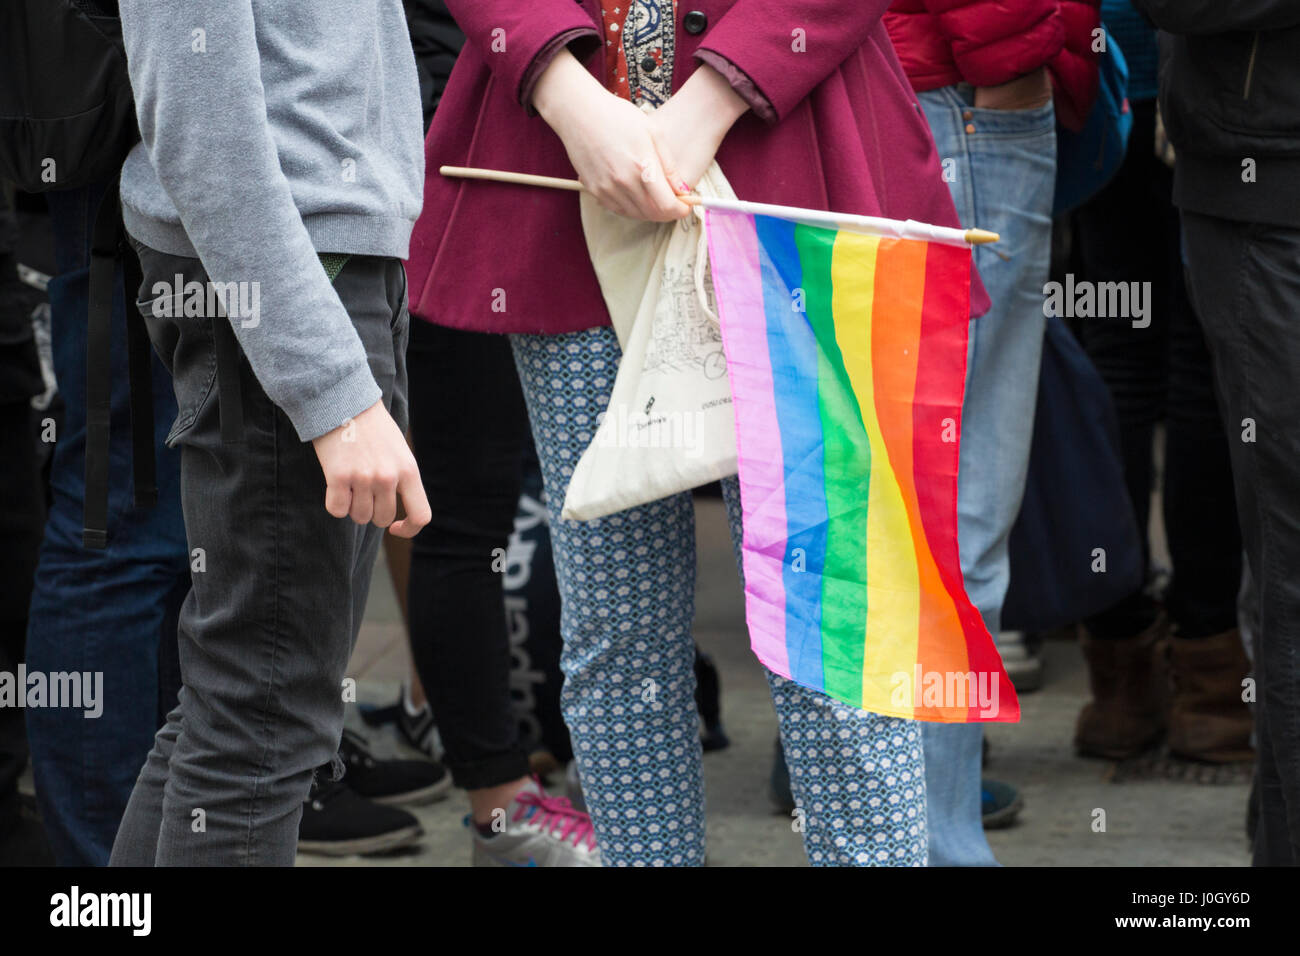 rally against the opening of concentration camp for gay men in Chechnia, held outside the Russian embassy in London. Stock Photo